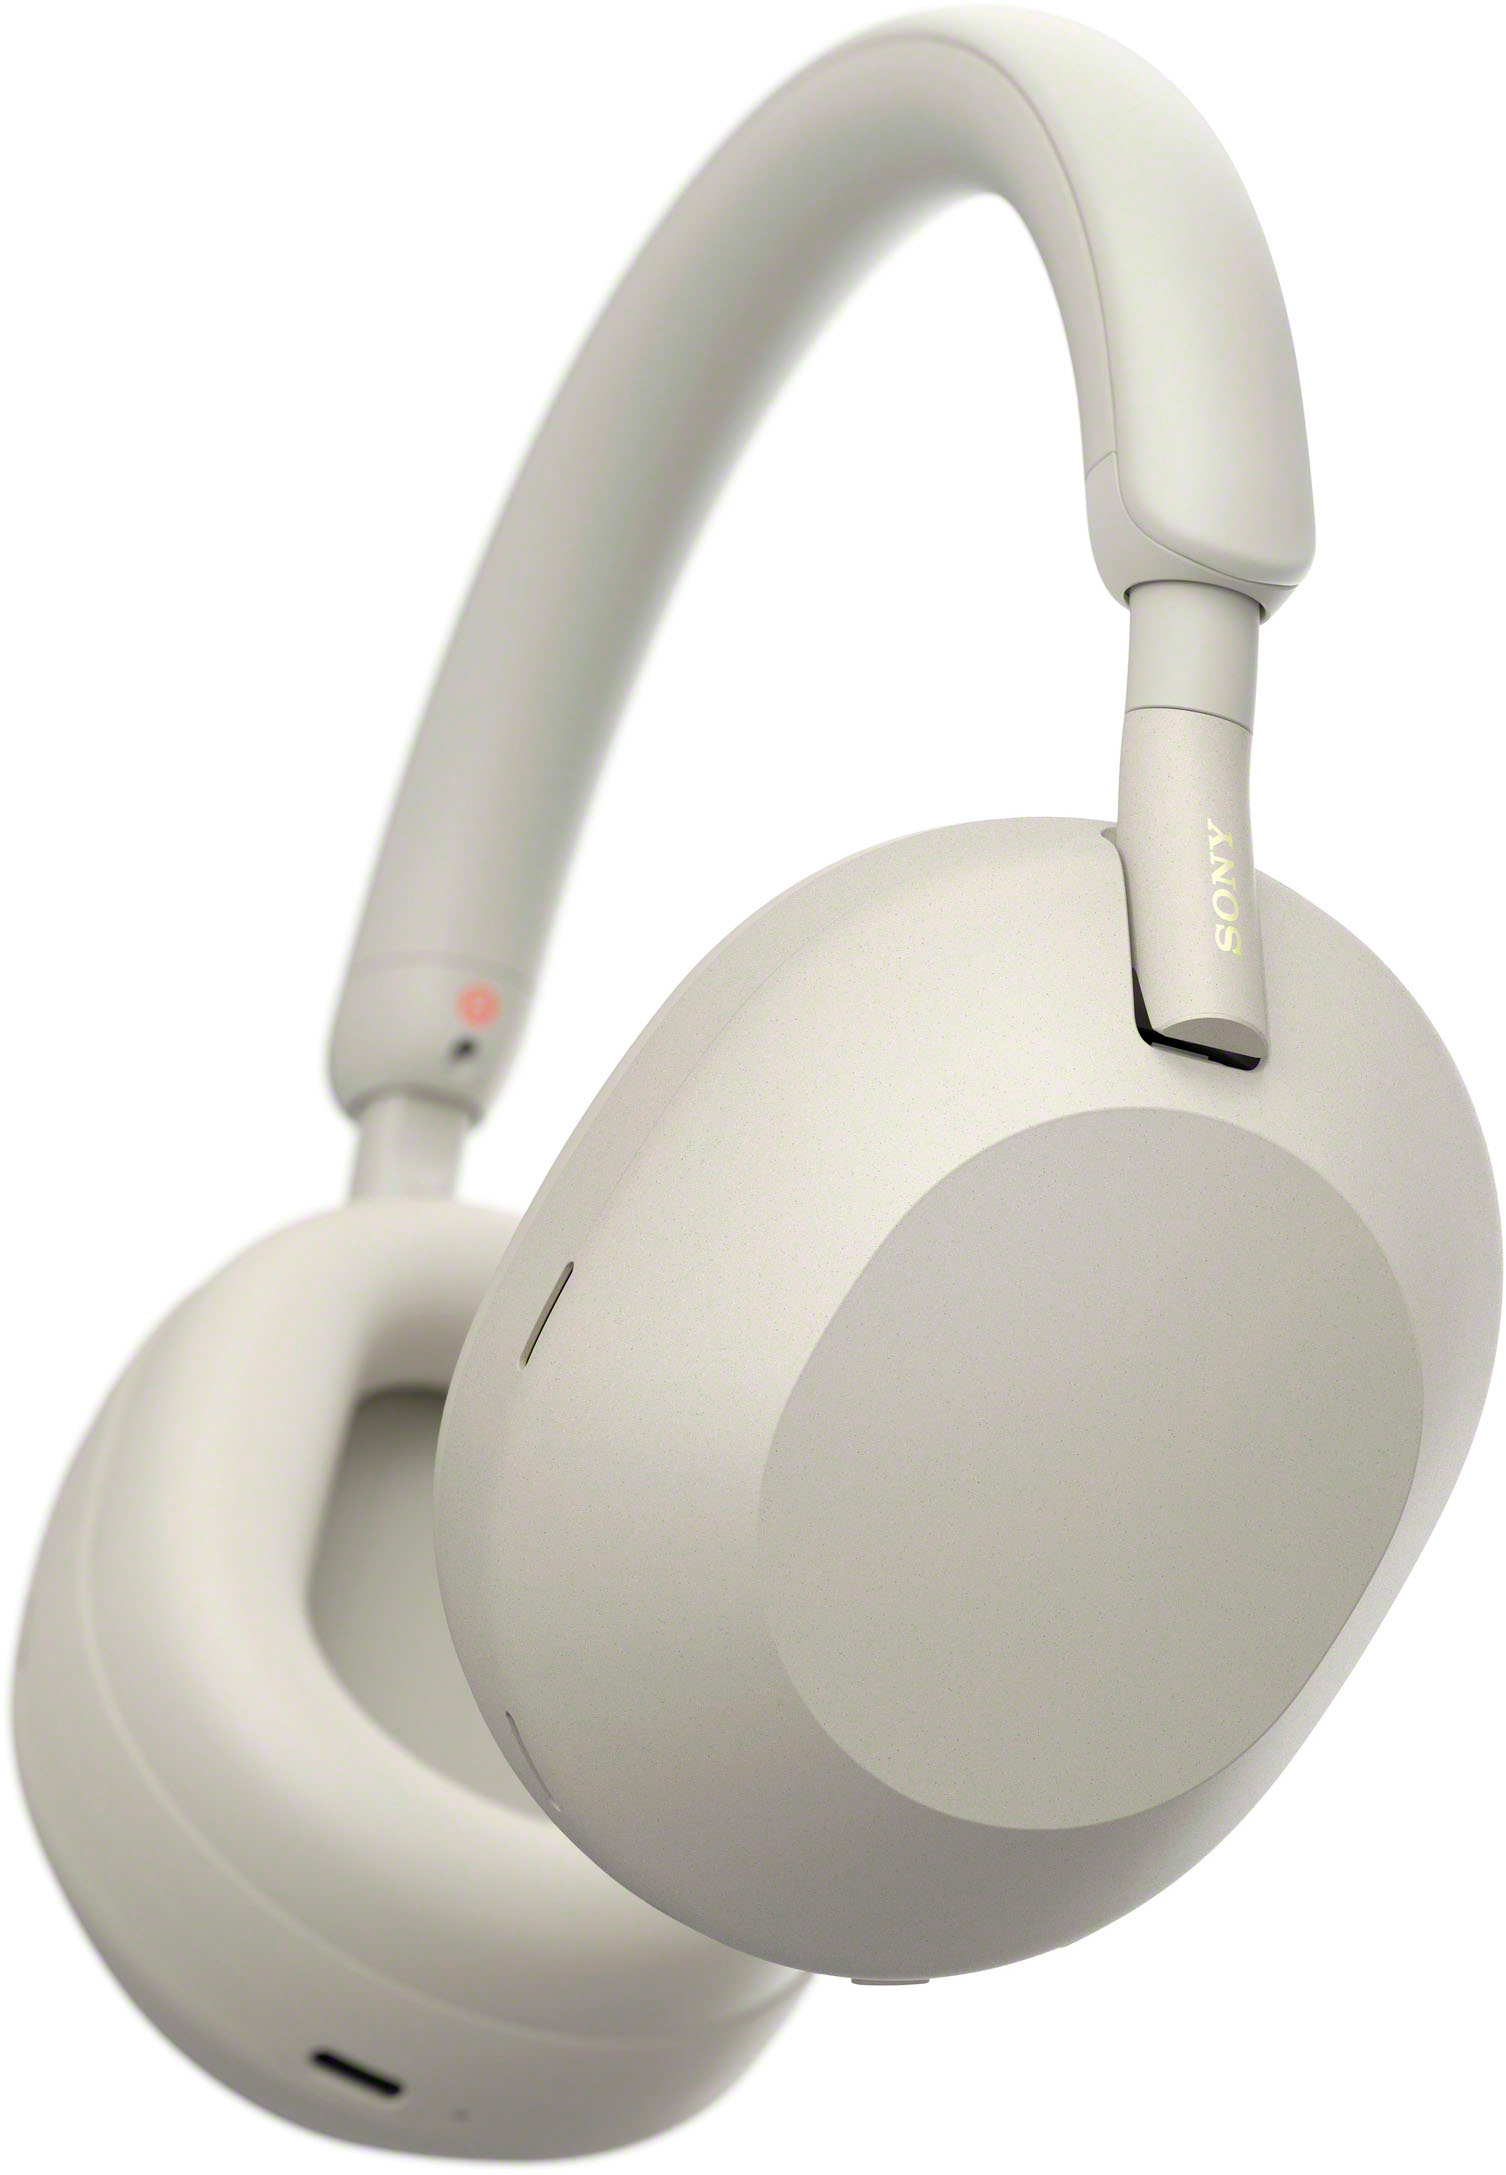 Sony WH-1000XM5 Wireless Noise-Canceling Over-the-Ear Headphones Silver  WH-1000XM5/S - Best Buy